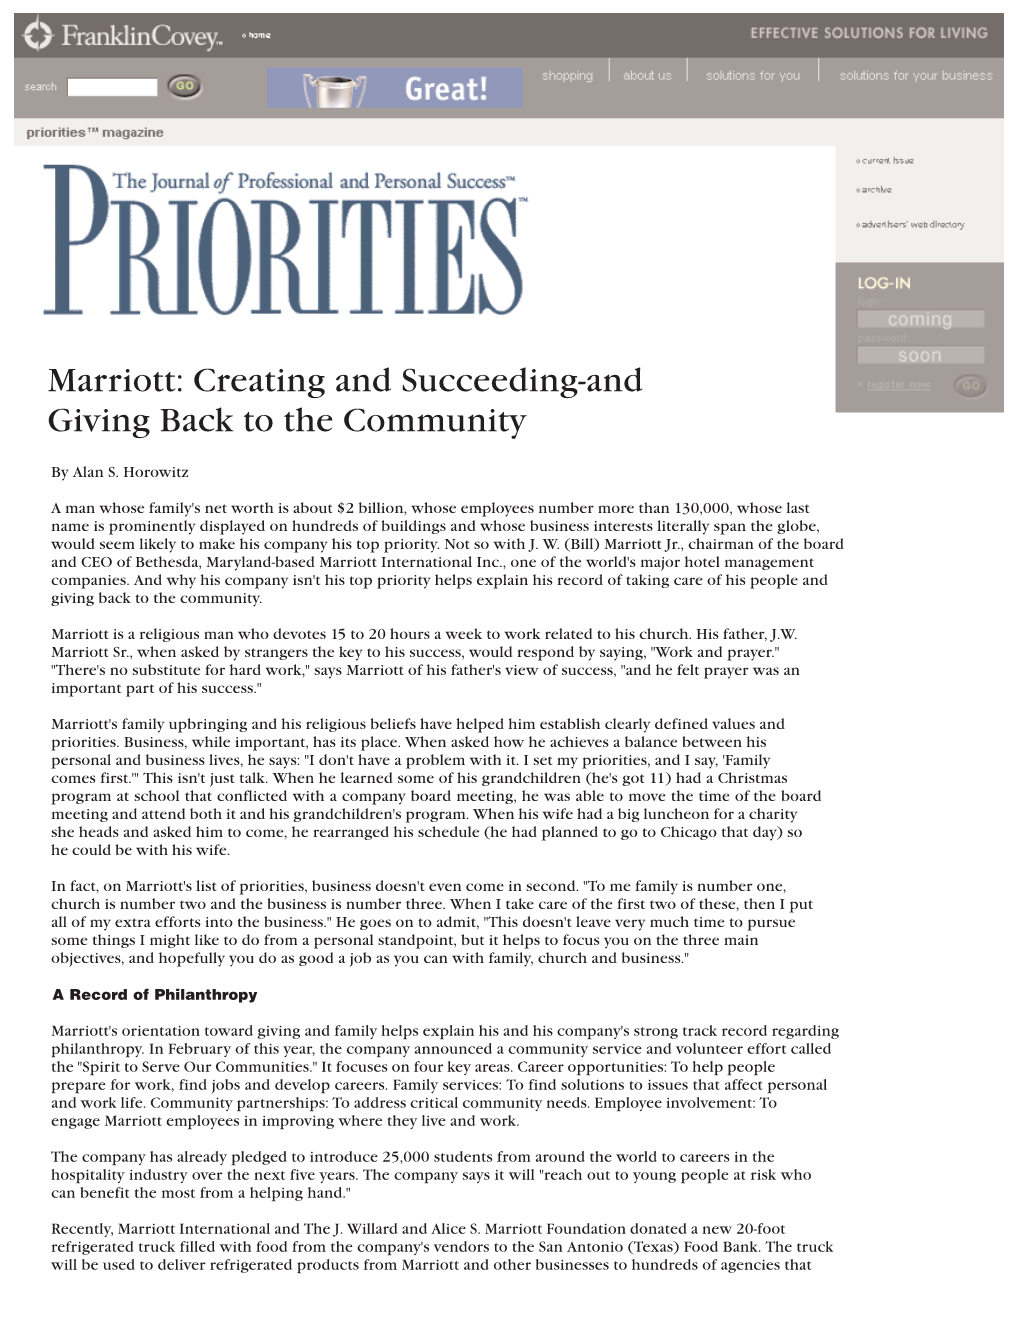 Marriott: Creating and Succeeding-And Giving Back to the Community